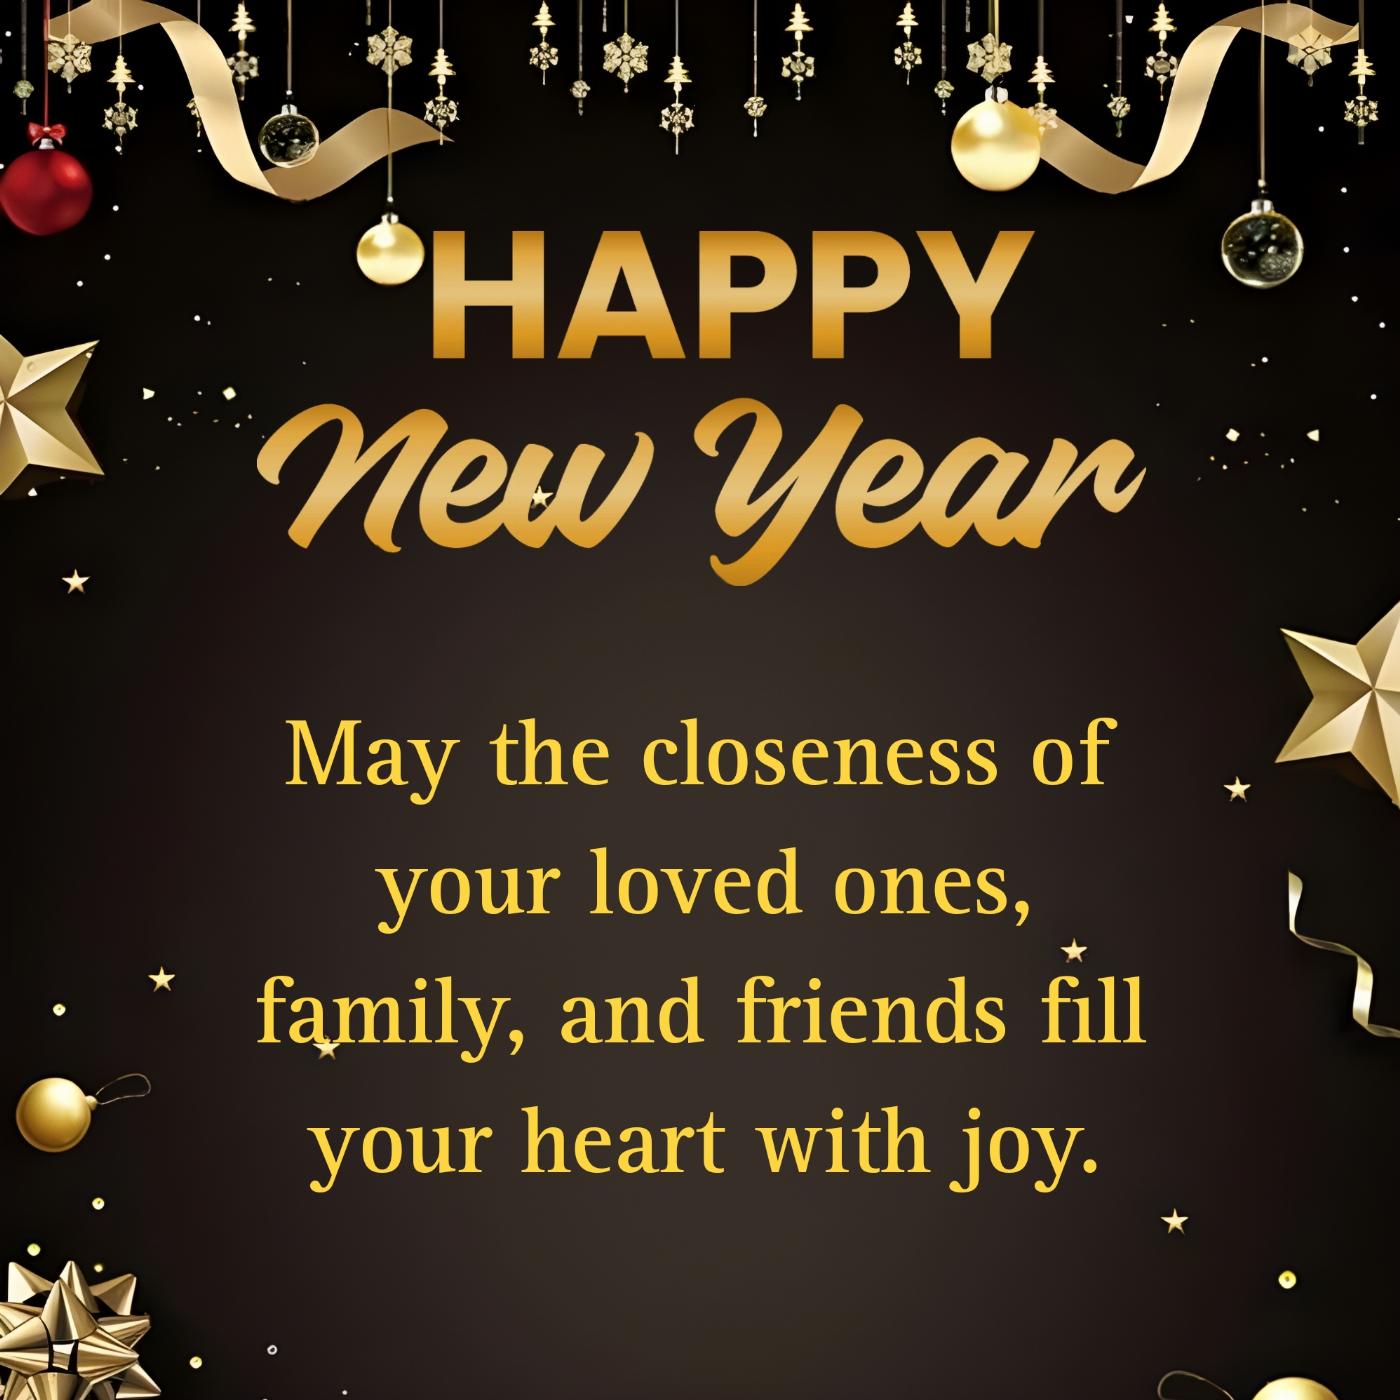 May the closeness of your loved ones family and friends